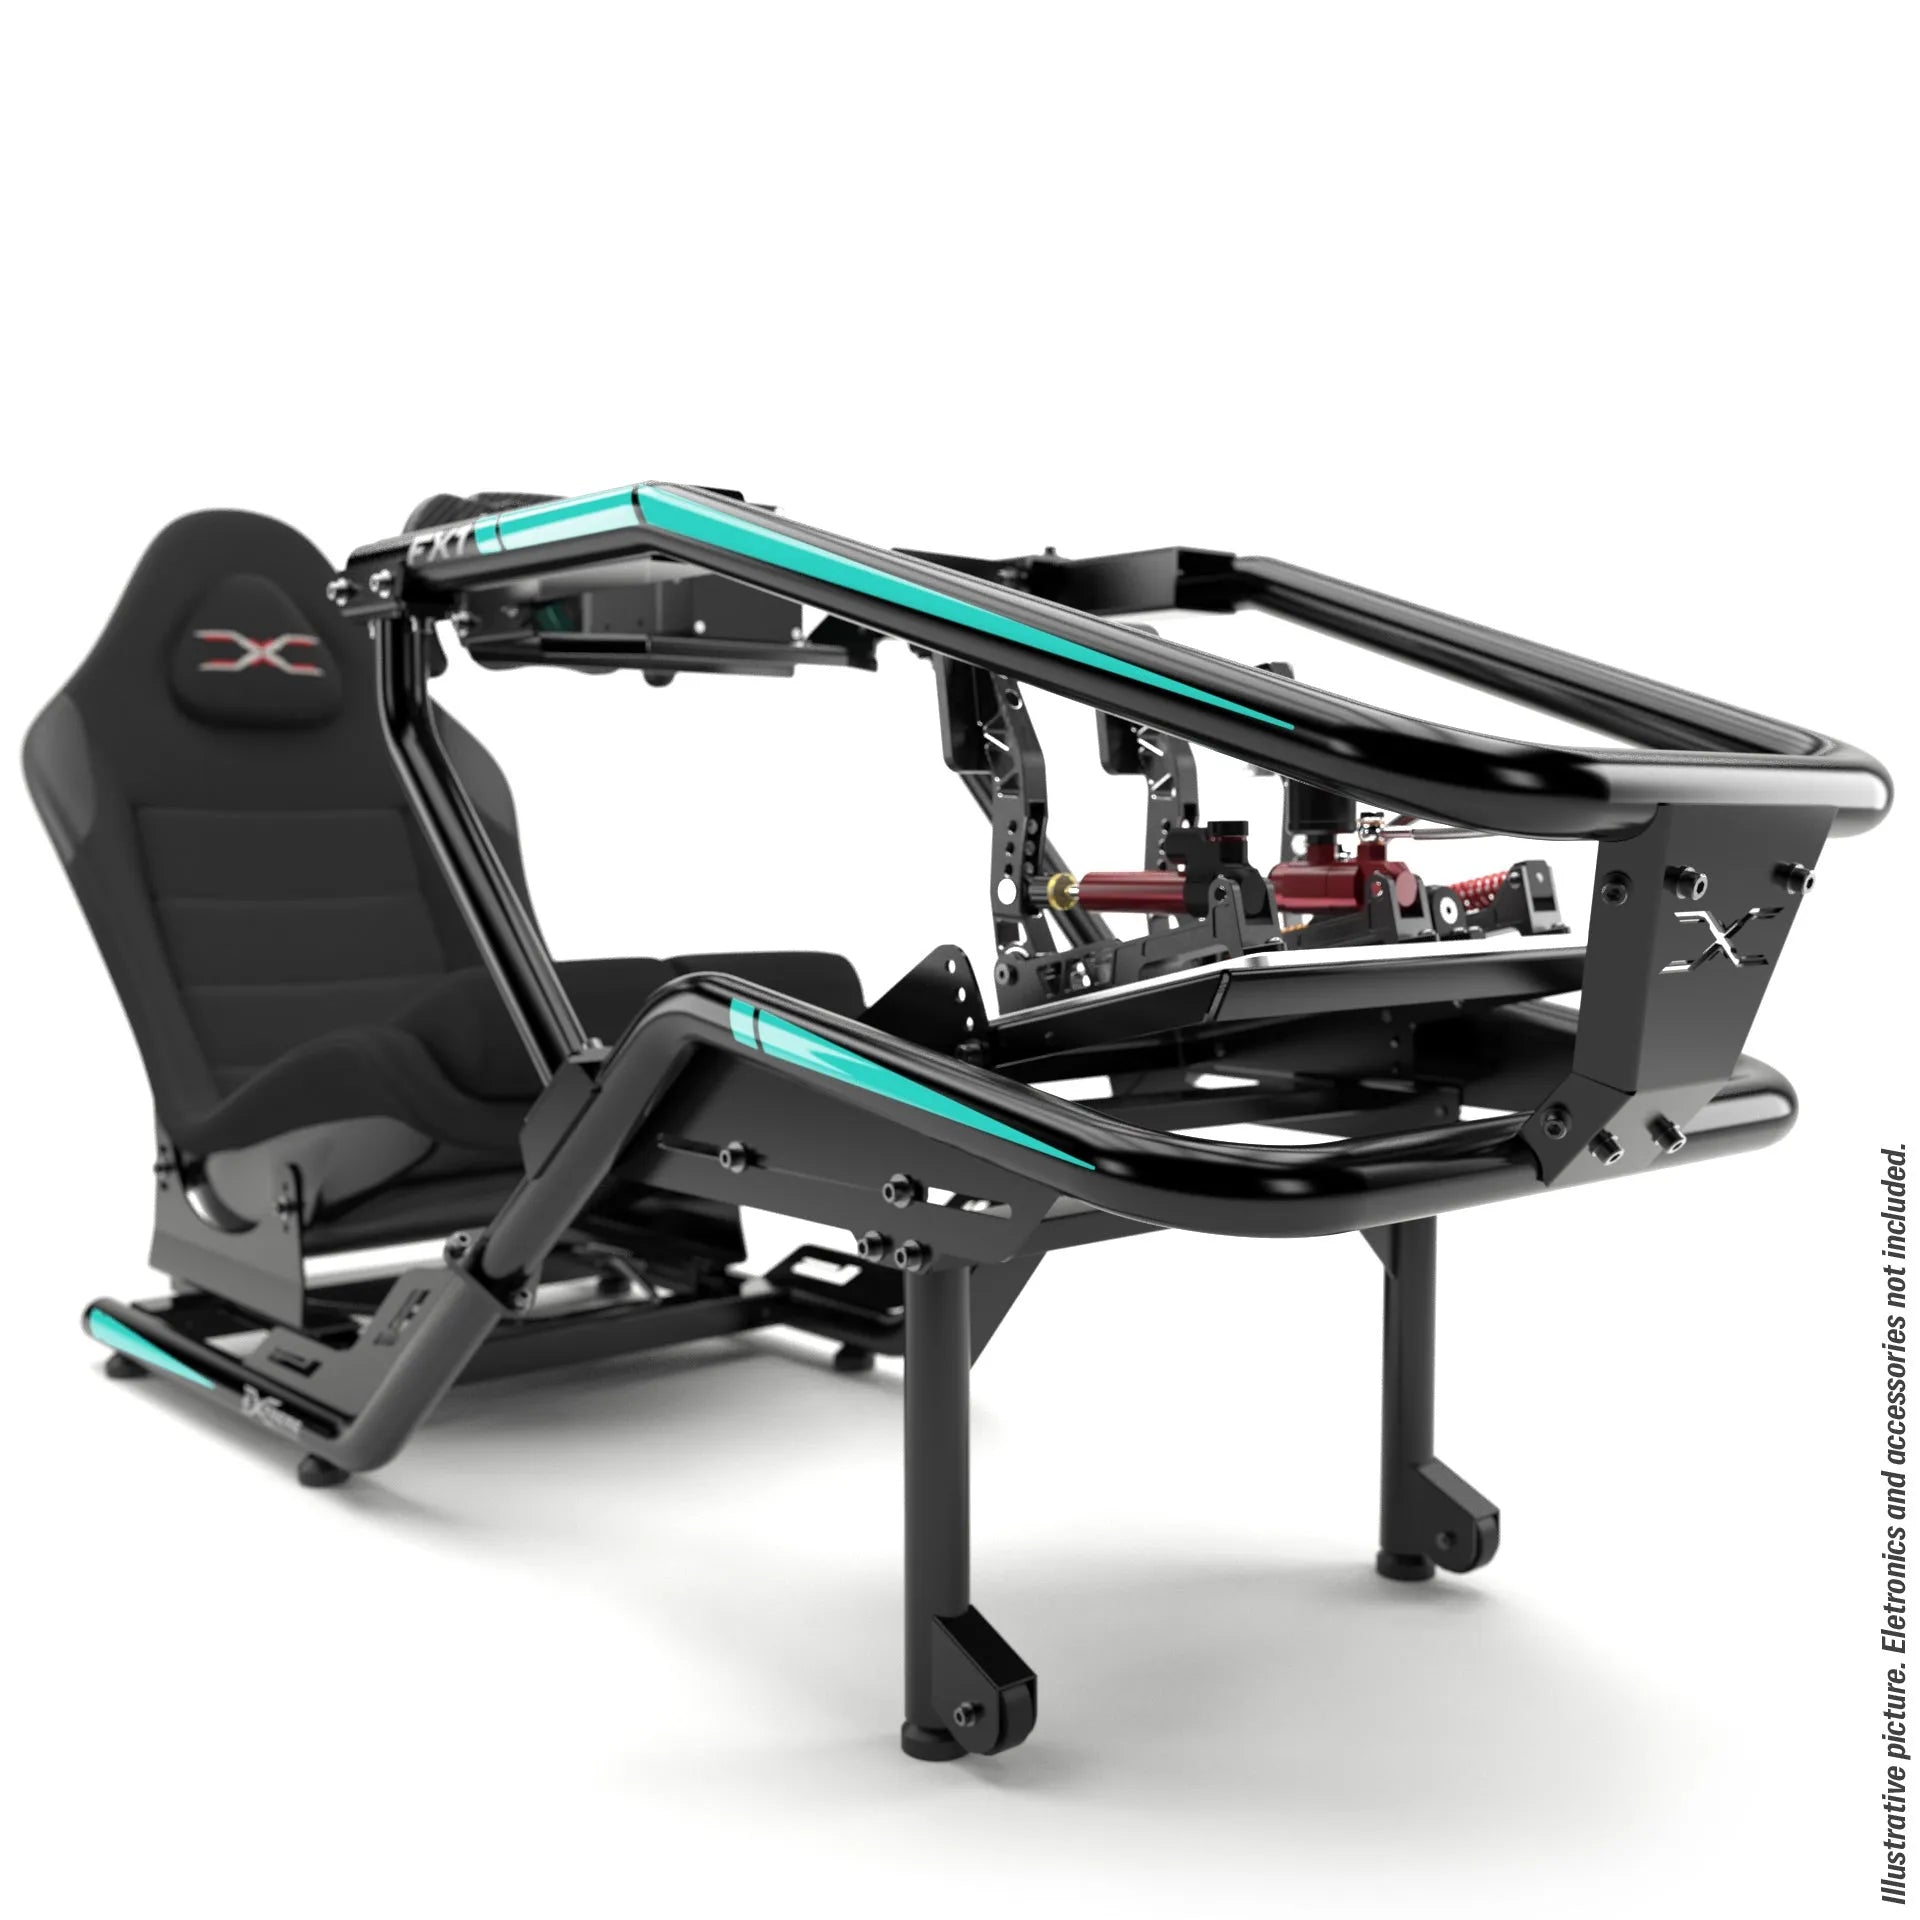 Extreme SimRacing Cockpit XT Premium 3.0 Fully Accessorized — FAST